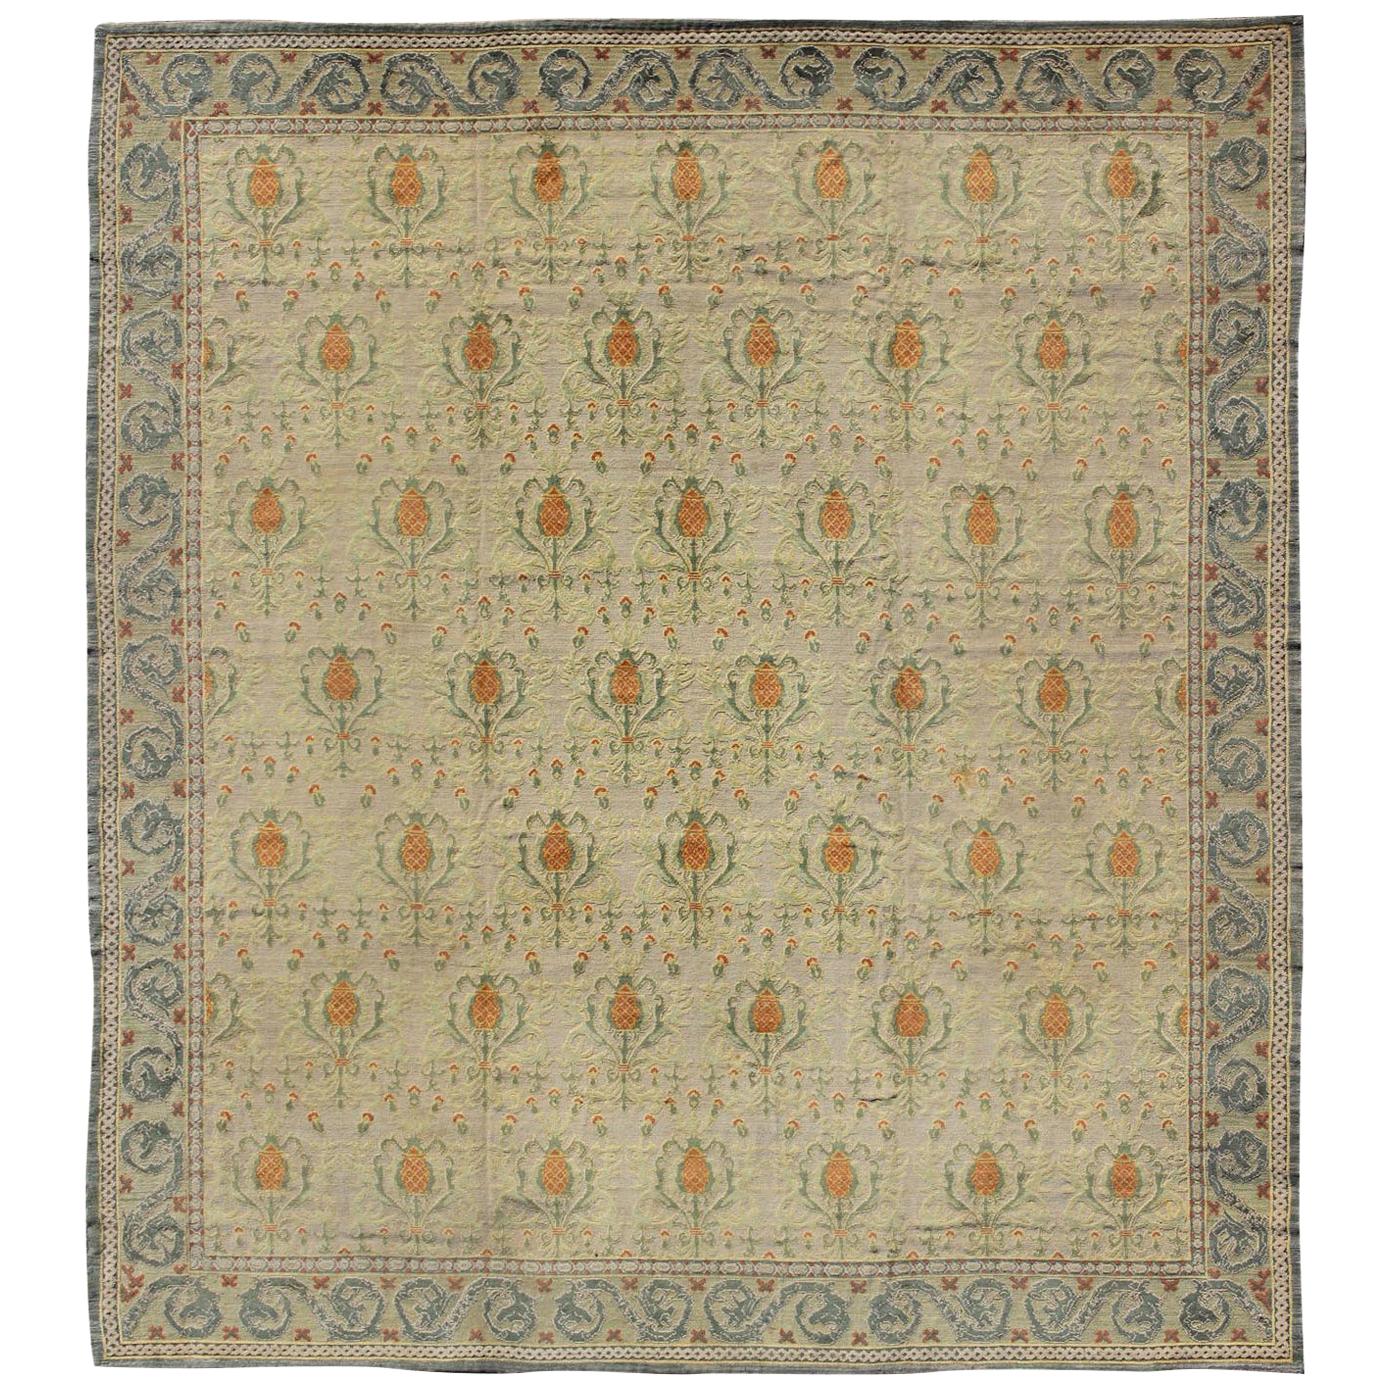 Square Sized Antique Spanish Carpet in Green, Orange and Gray/Blue